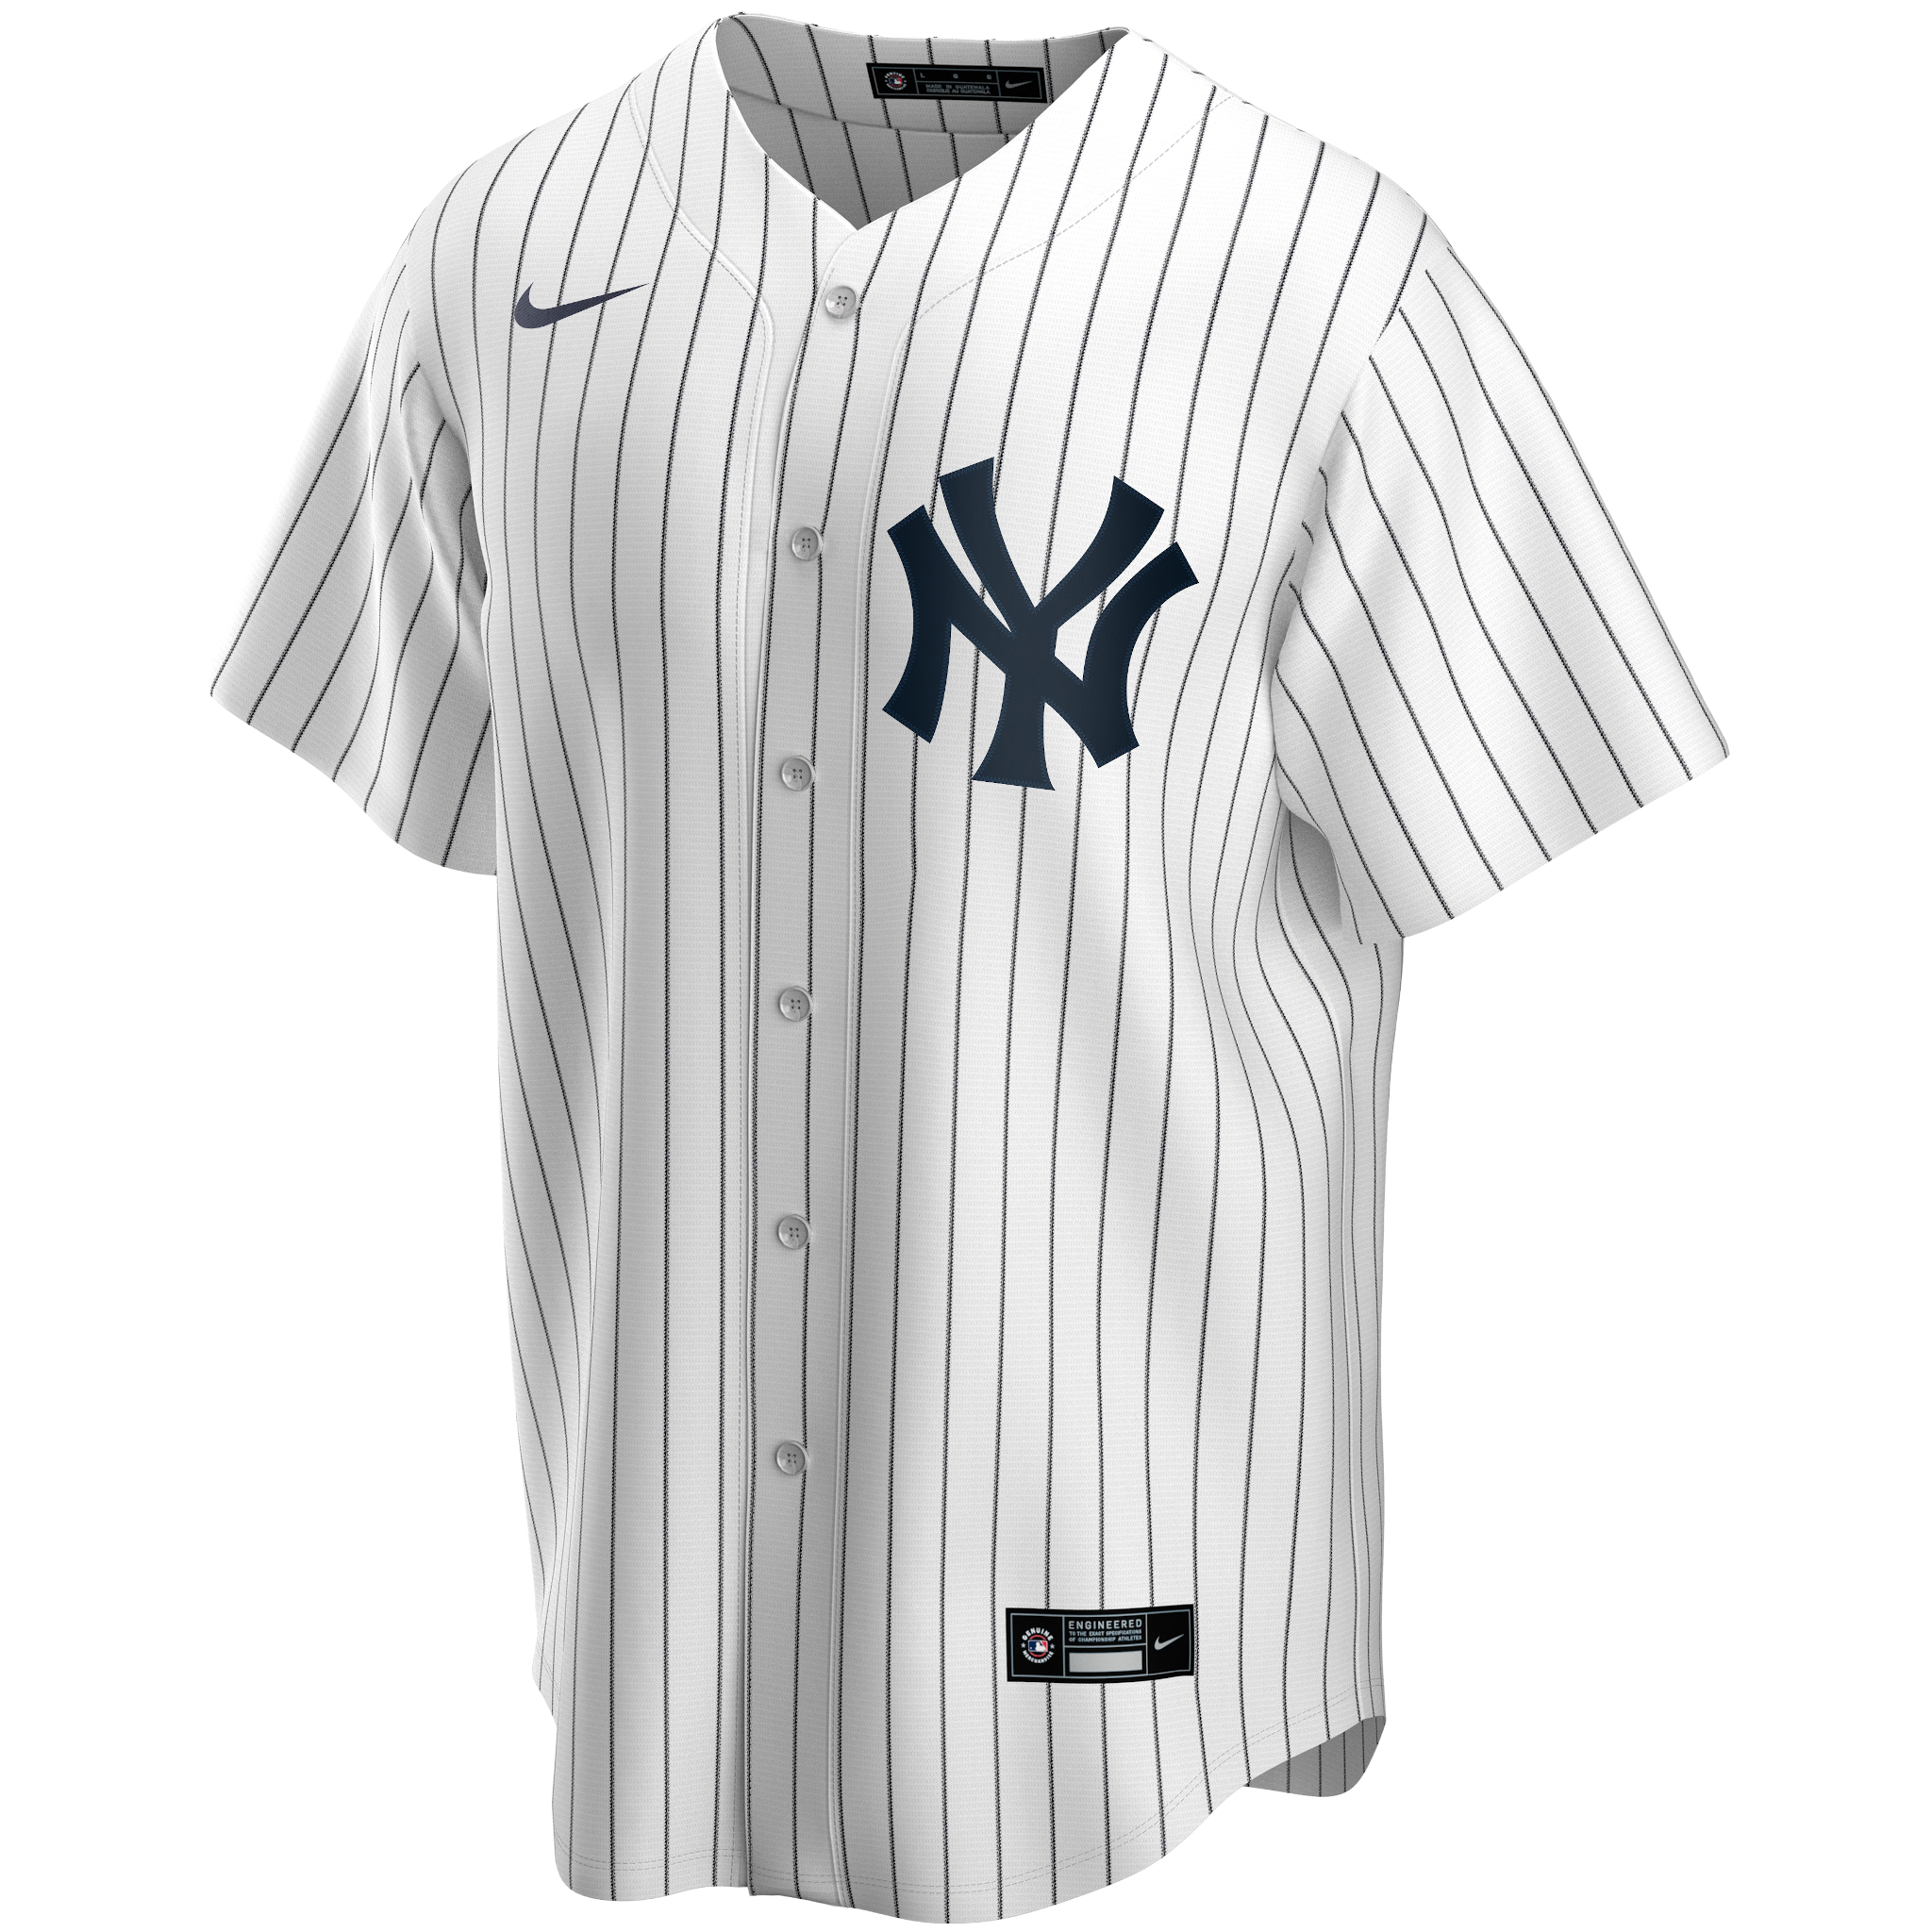 Mickey Mantle NY Yankees Jersey with Digital Autograph